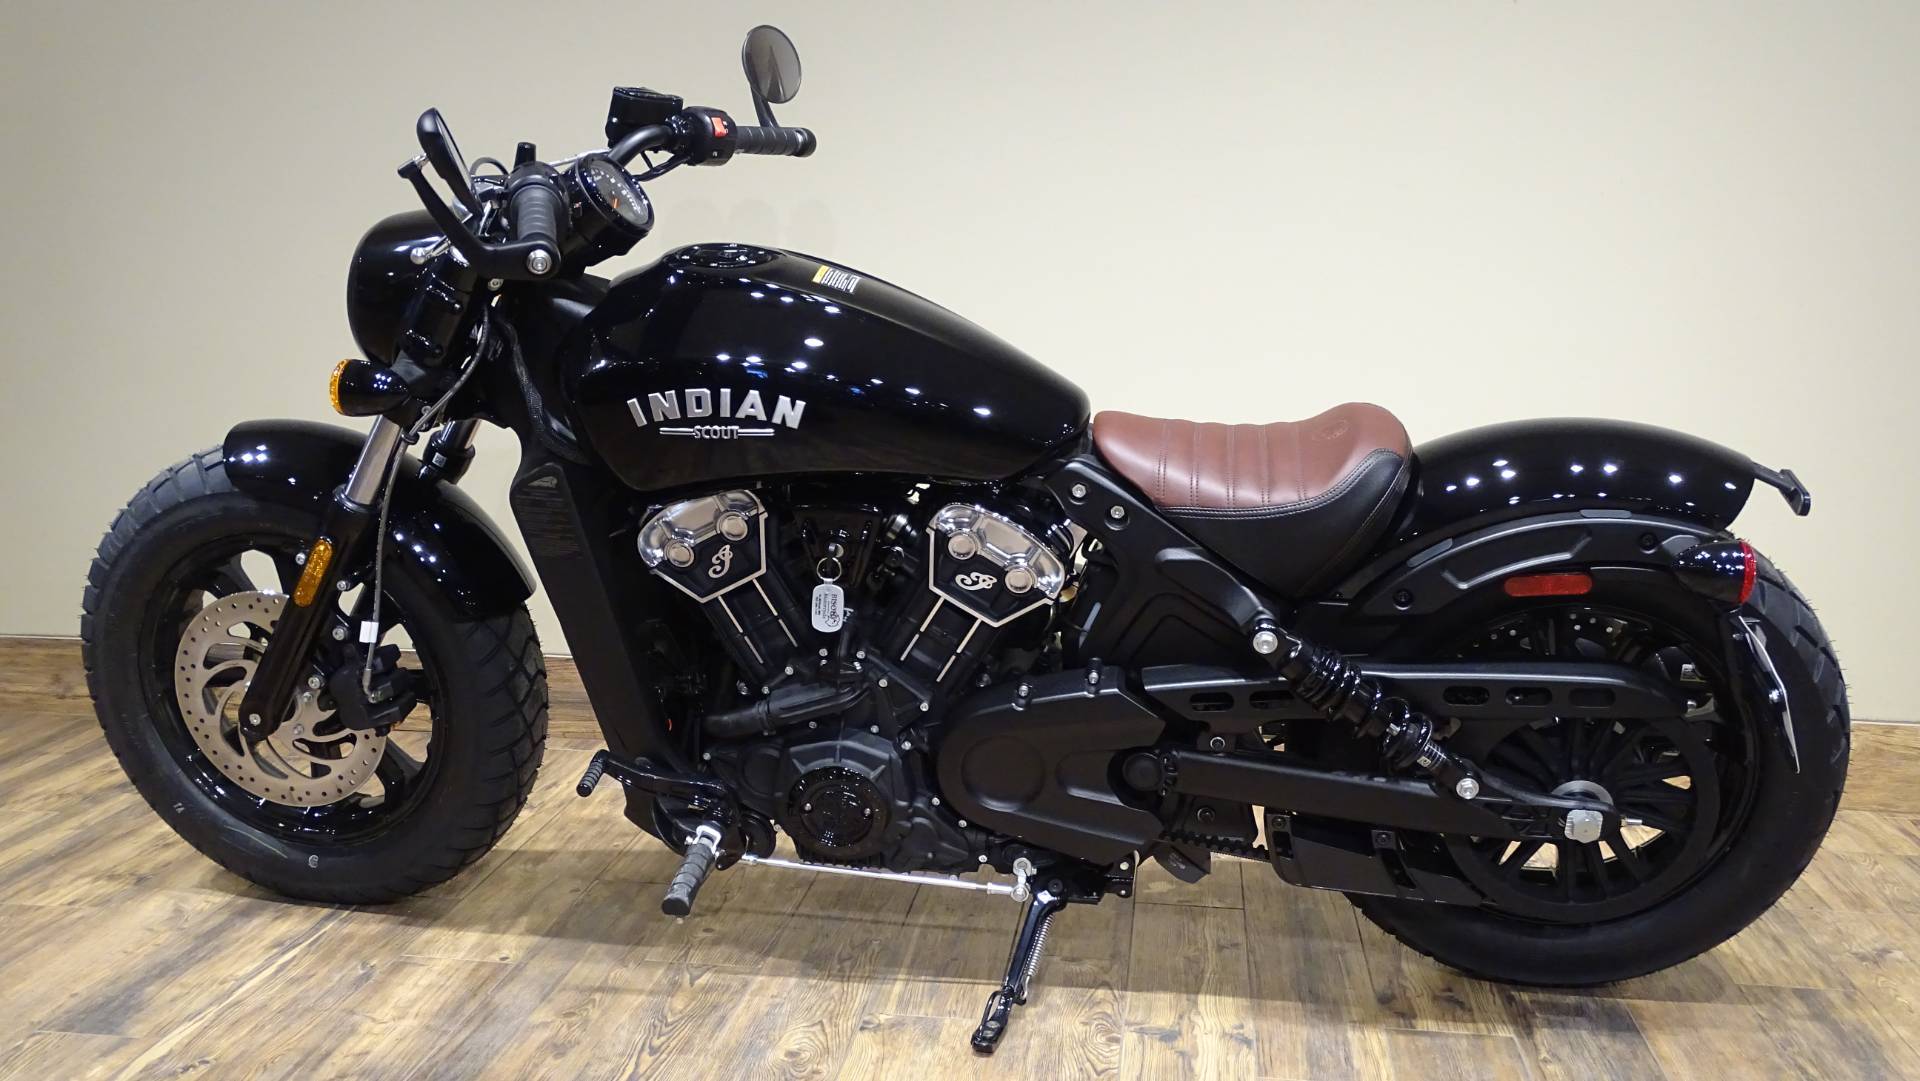 2018 Indian Scout Bobber For Sale Saint Michael, MN : 128237